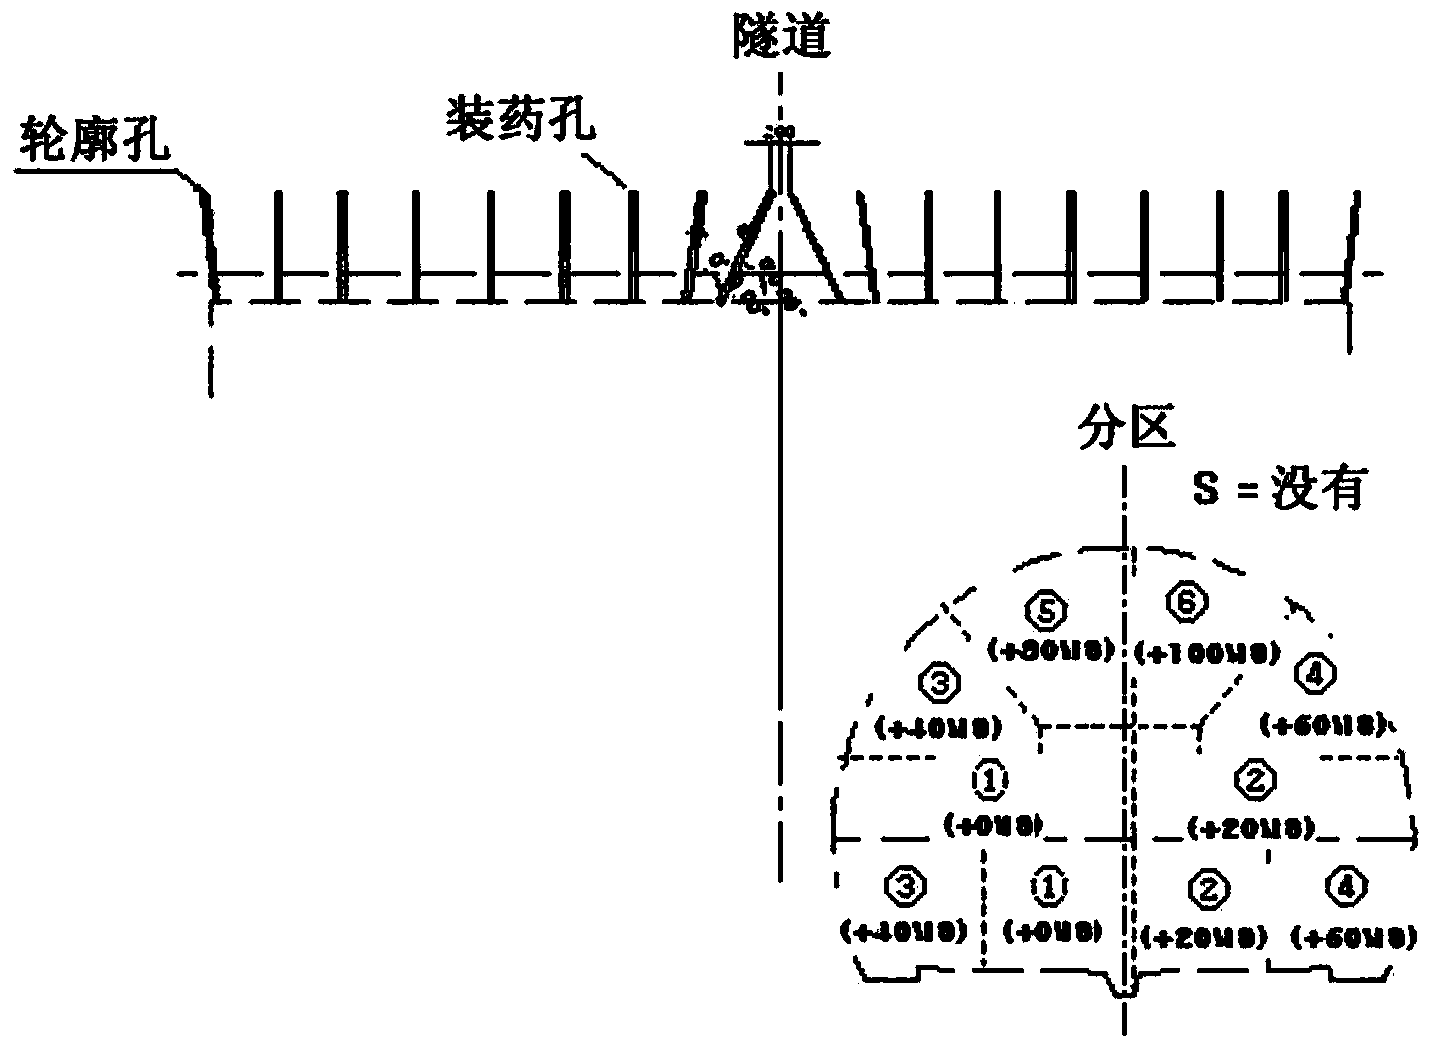 Explosion system and method using electronic detonator and non-electronic detonator combination mode